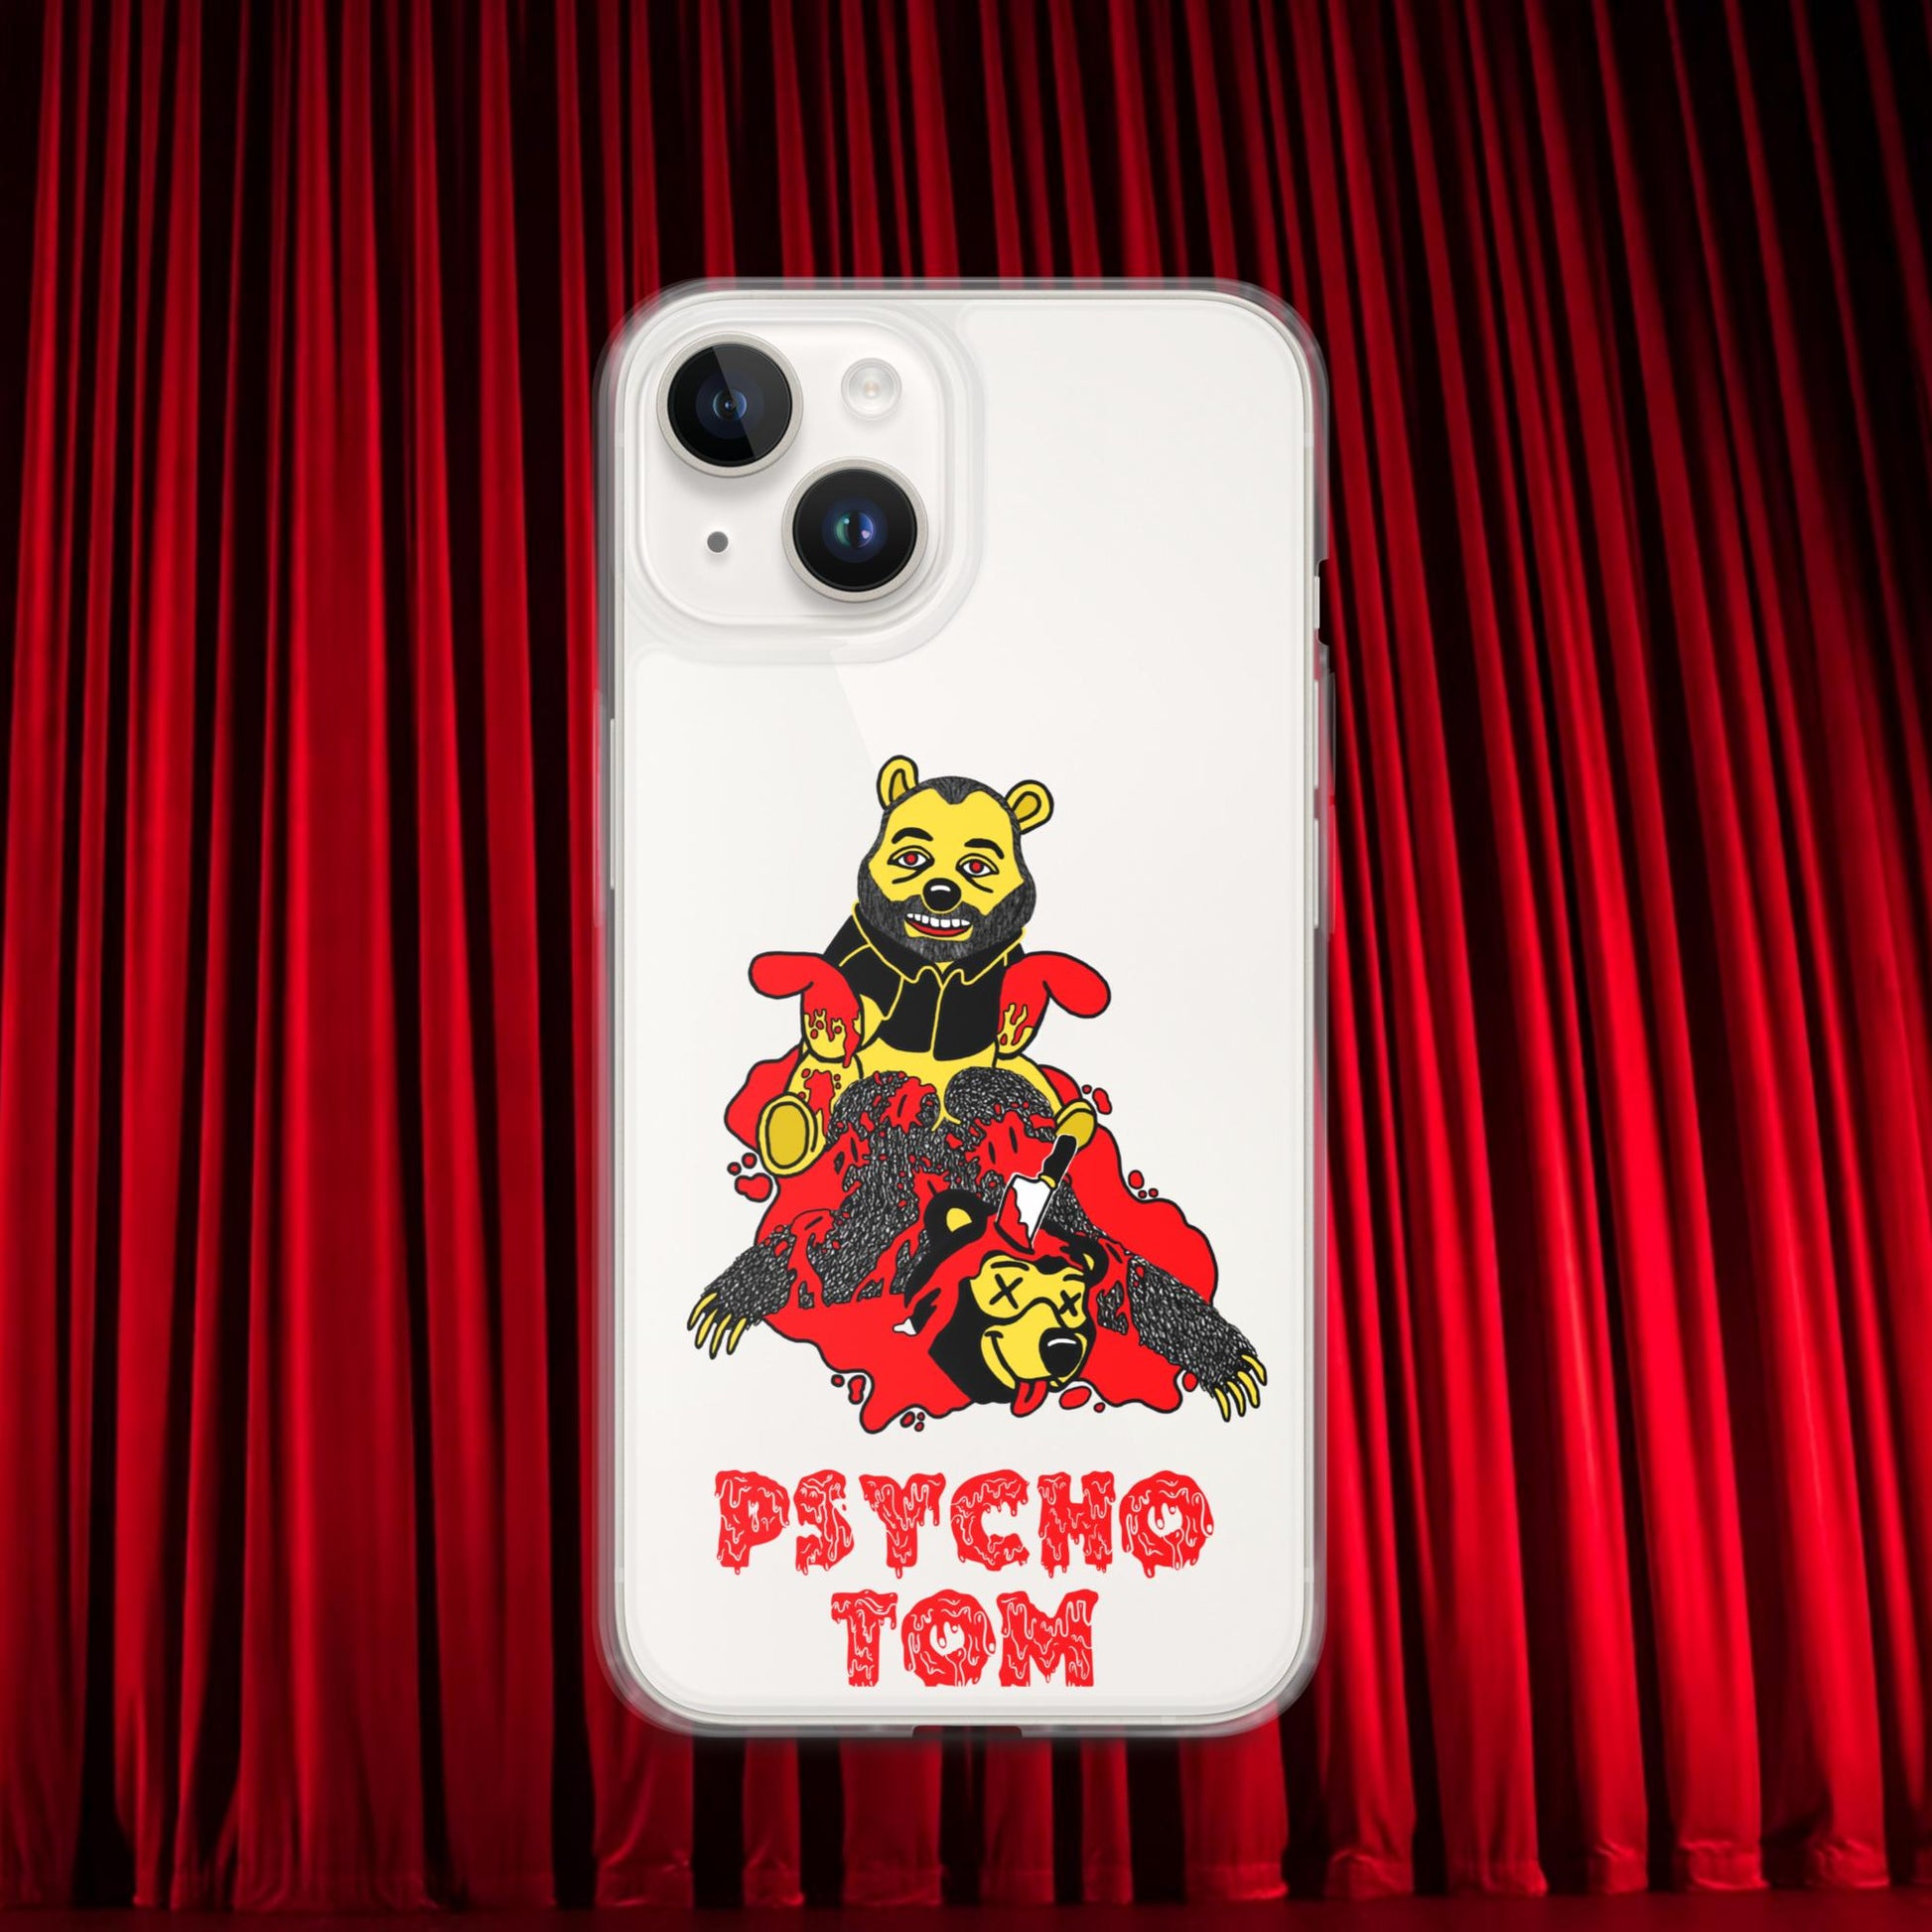 Psycho Tom Segura Clear Case for iPhone, Tom Segura Phone case, Tom Segura iPhone Case, 2b1c Clear Case for iPhone, 2 Bears 1 Cave merch, YMH merch Next Cult Brand 2 Bears 1 Cave, Podcasts, Stand-up Comedy, Tom Segura, YMH